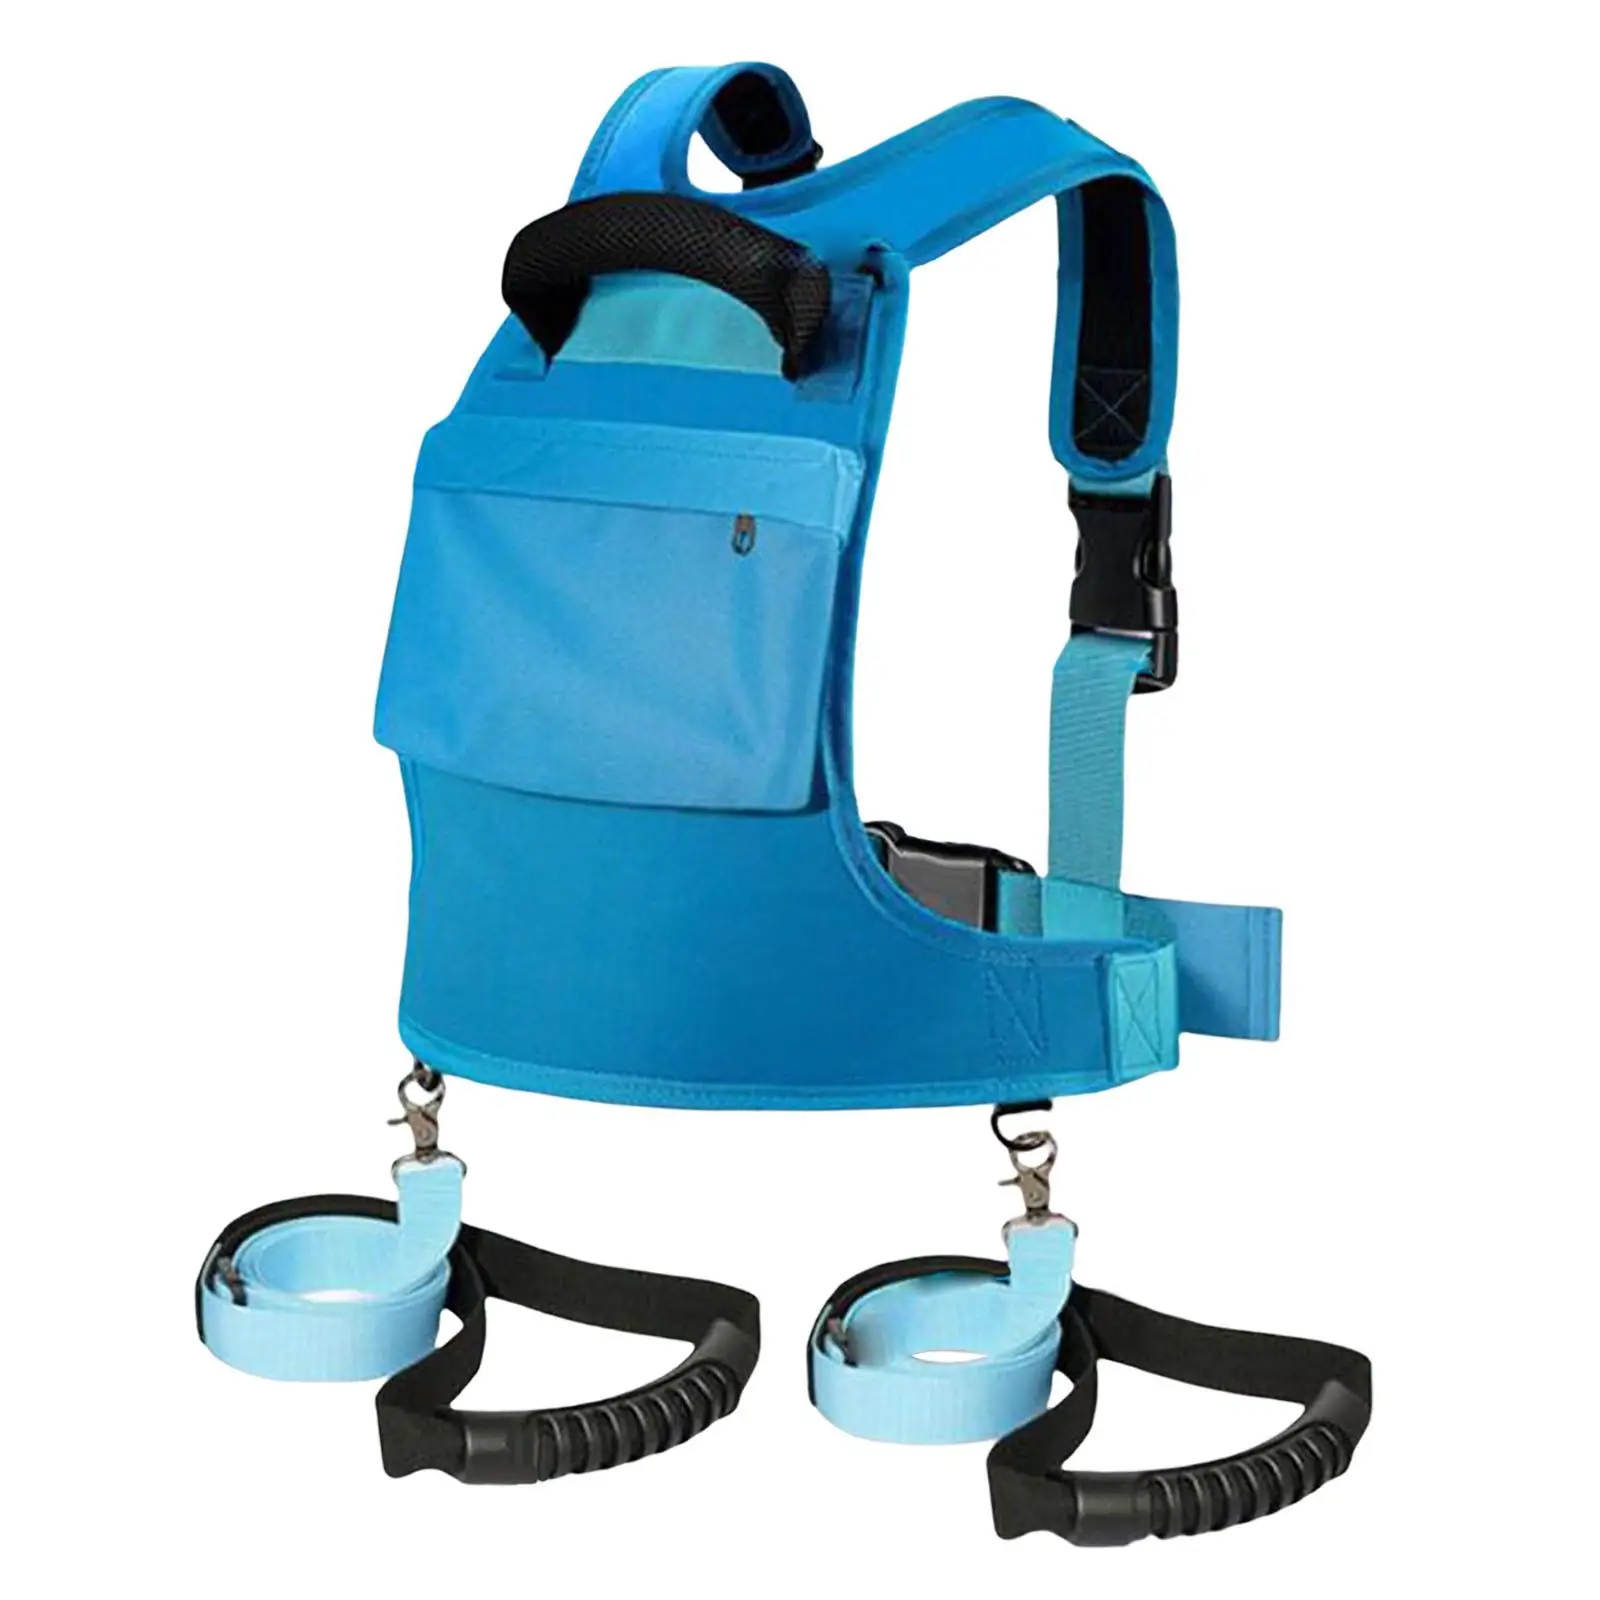 Ski and Snowboard Harness Trainer for Kids Speed Control for Winter Sports